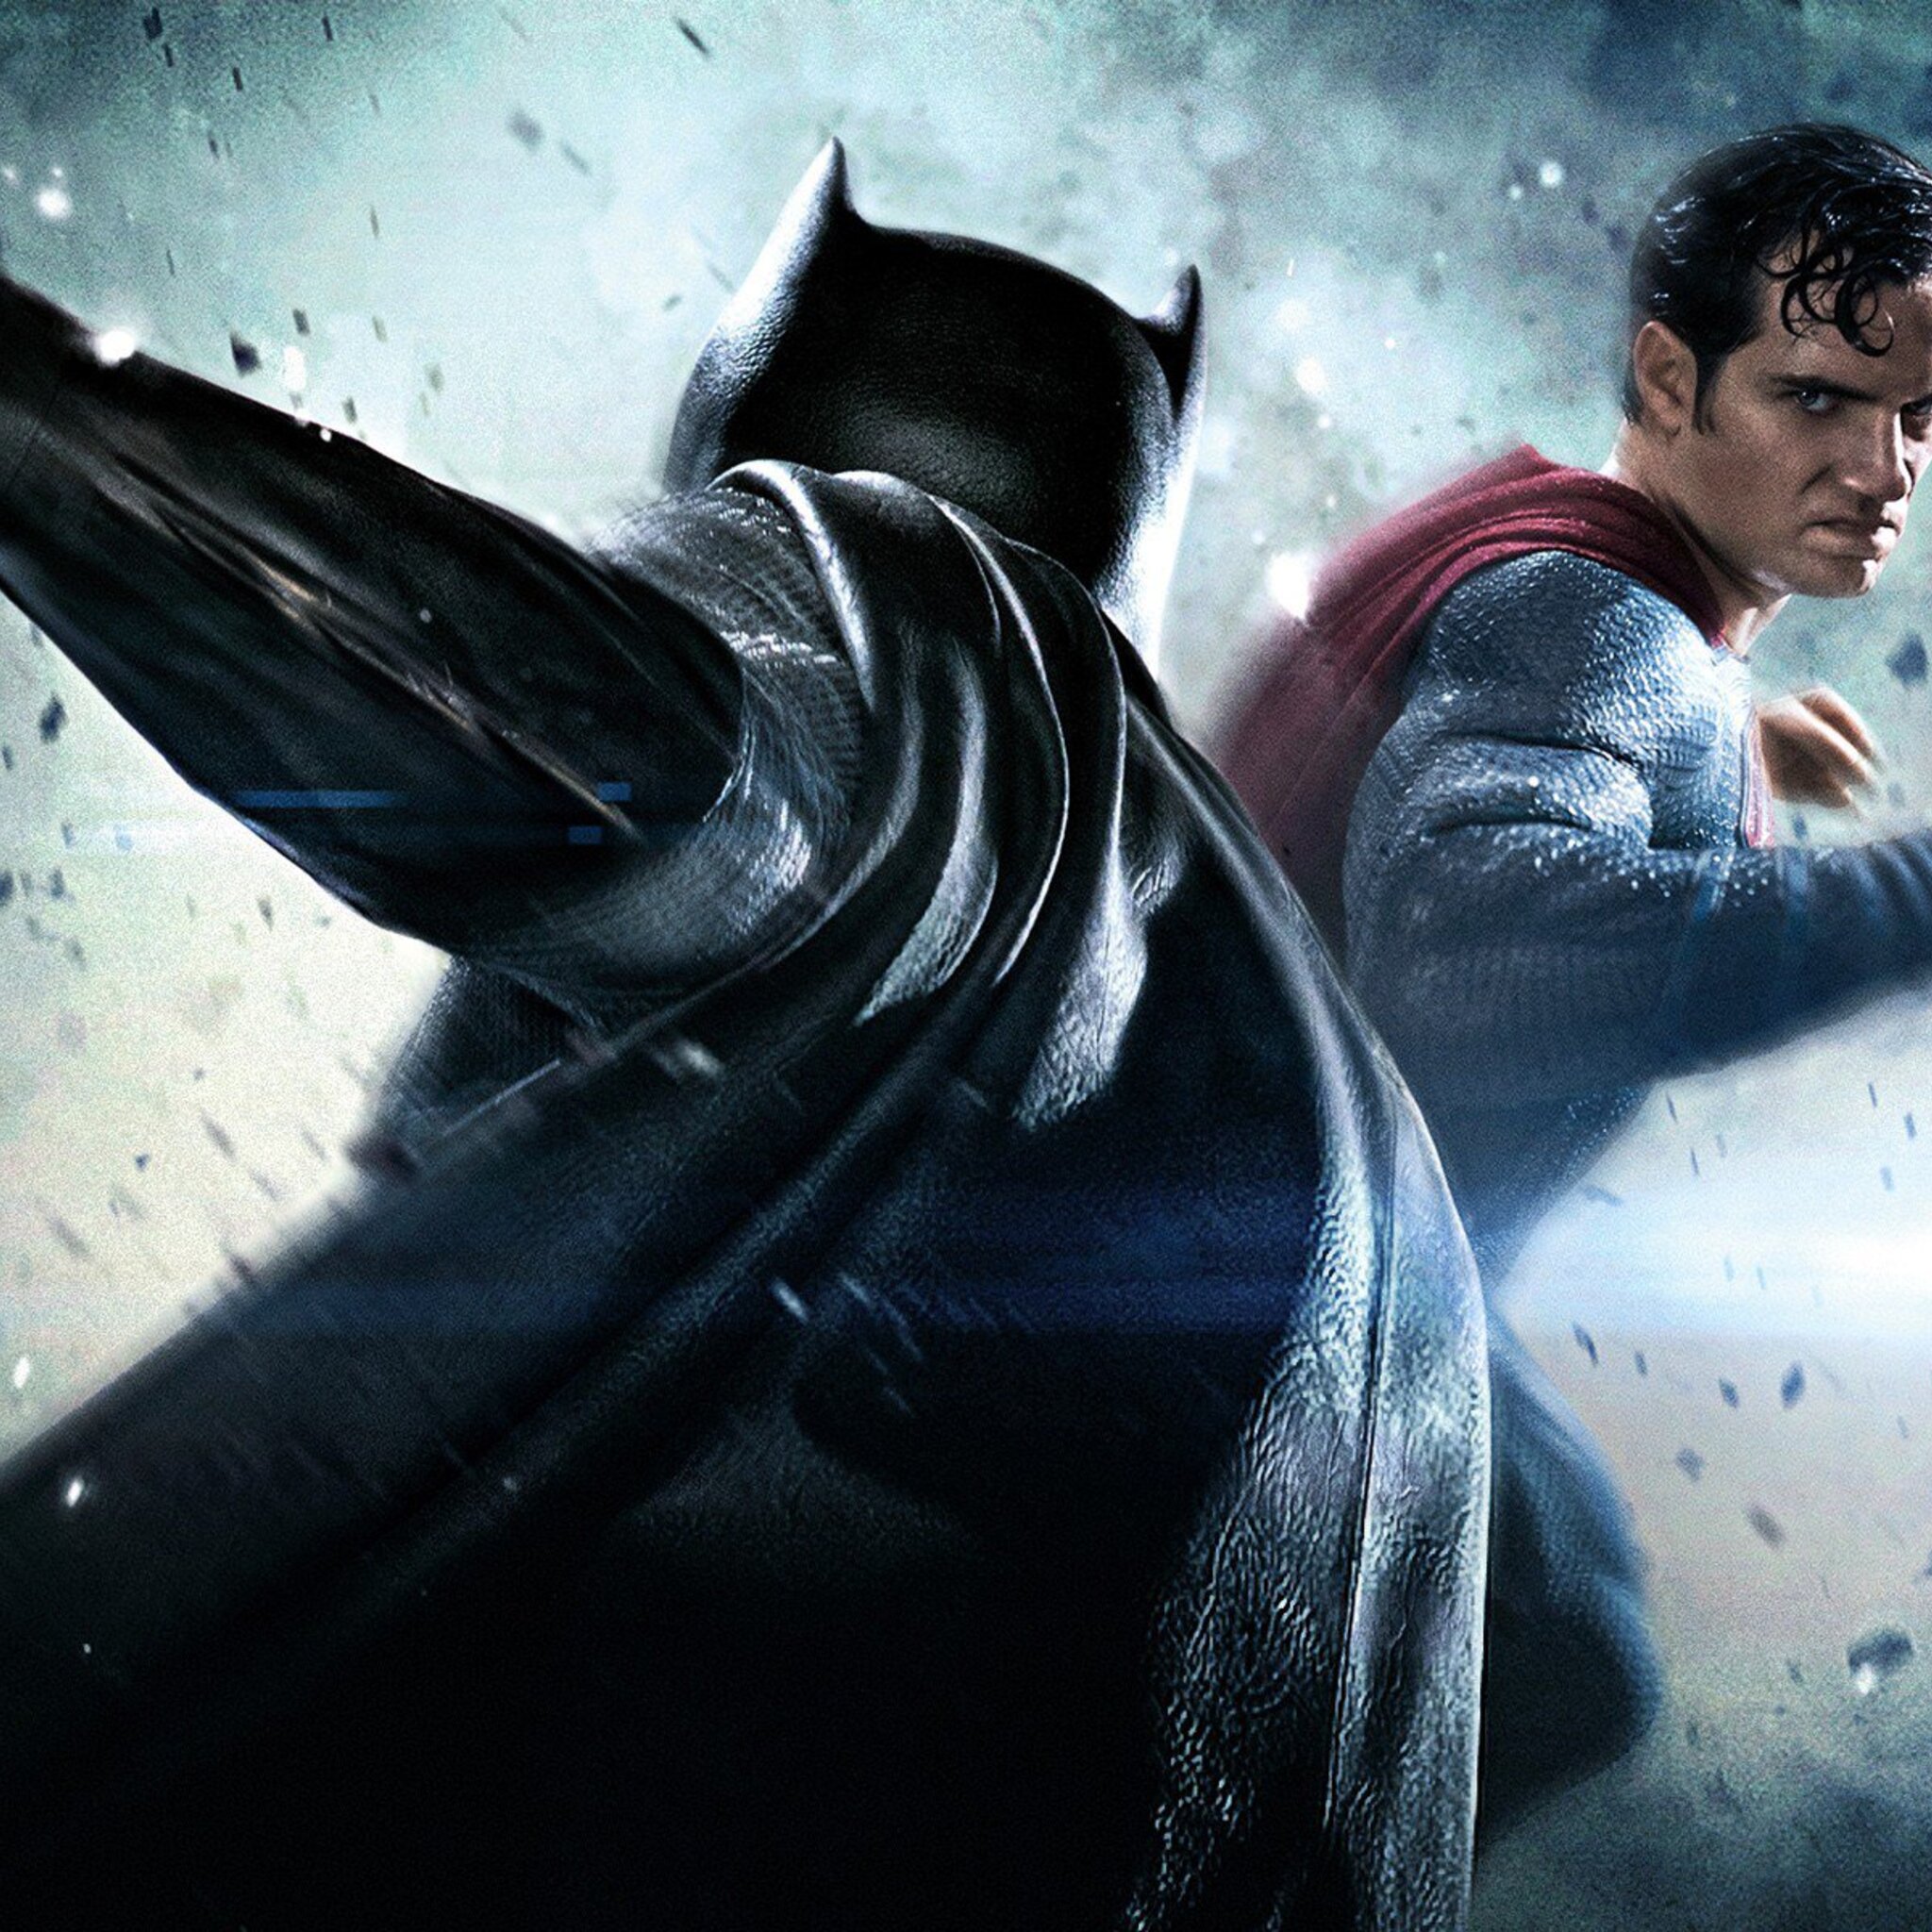 Batman v Superman: Dawn of Justice download the new version for windows